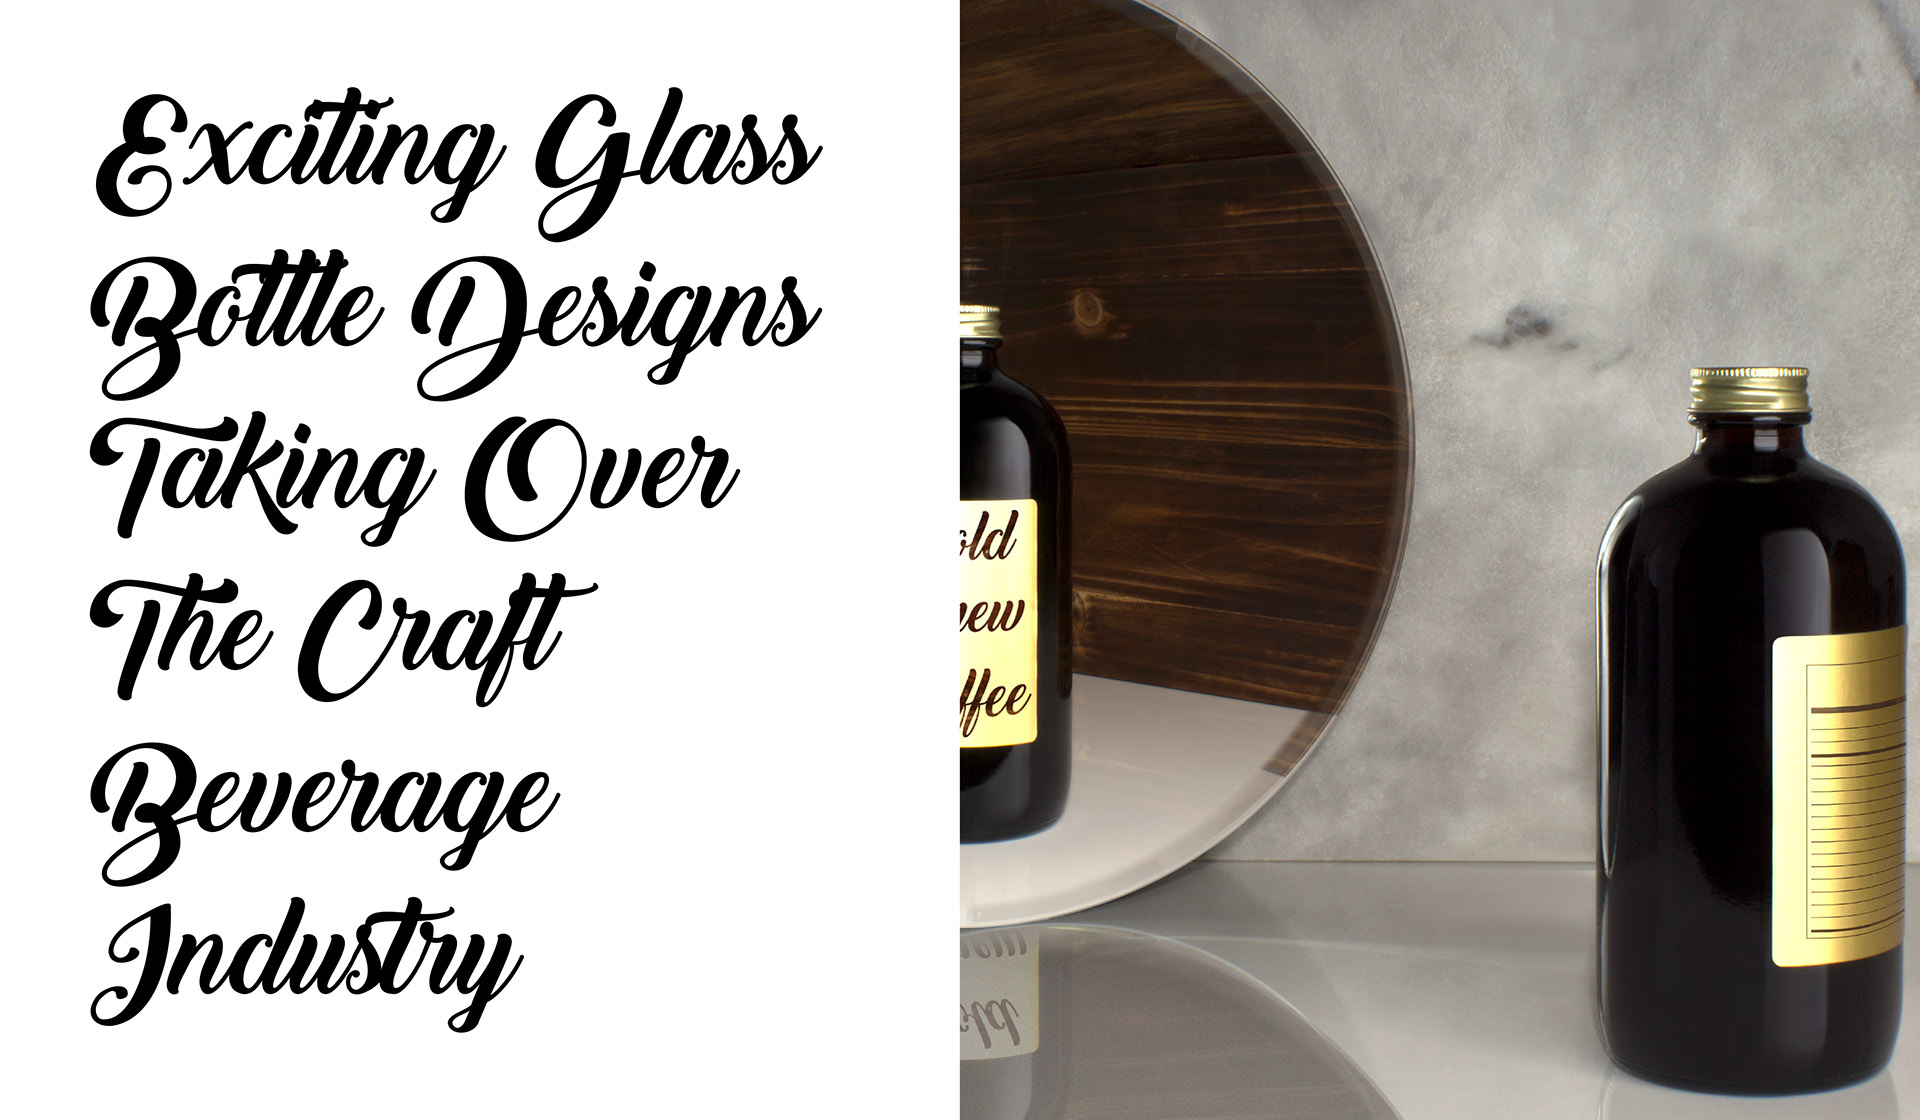 Exciting Glass Bottle Designs Taking Over The Craft Beverage Industry